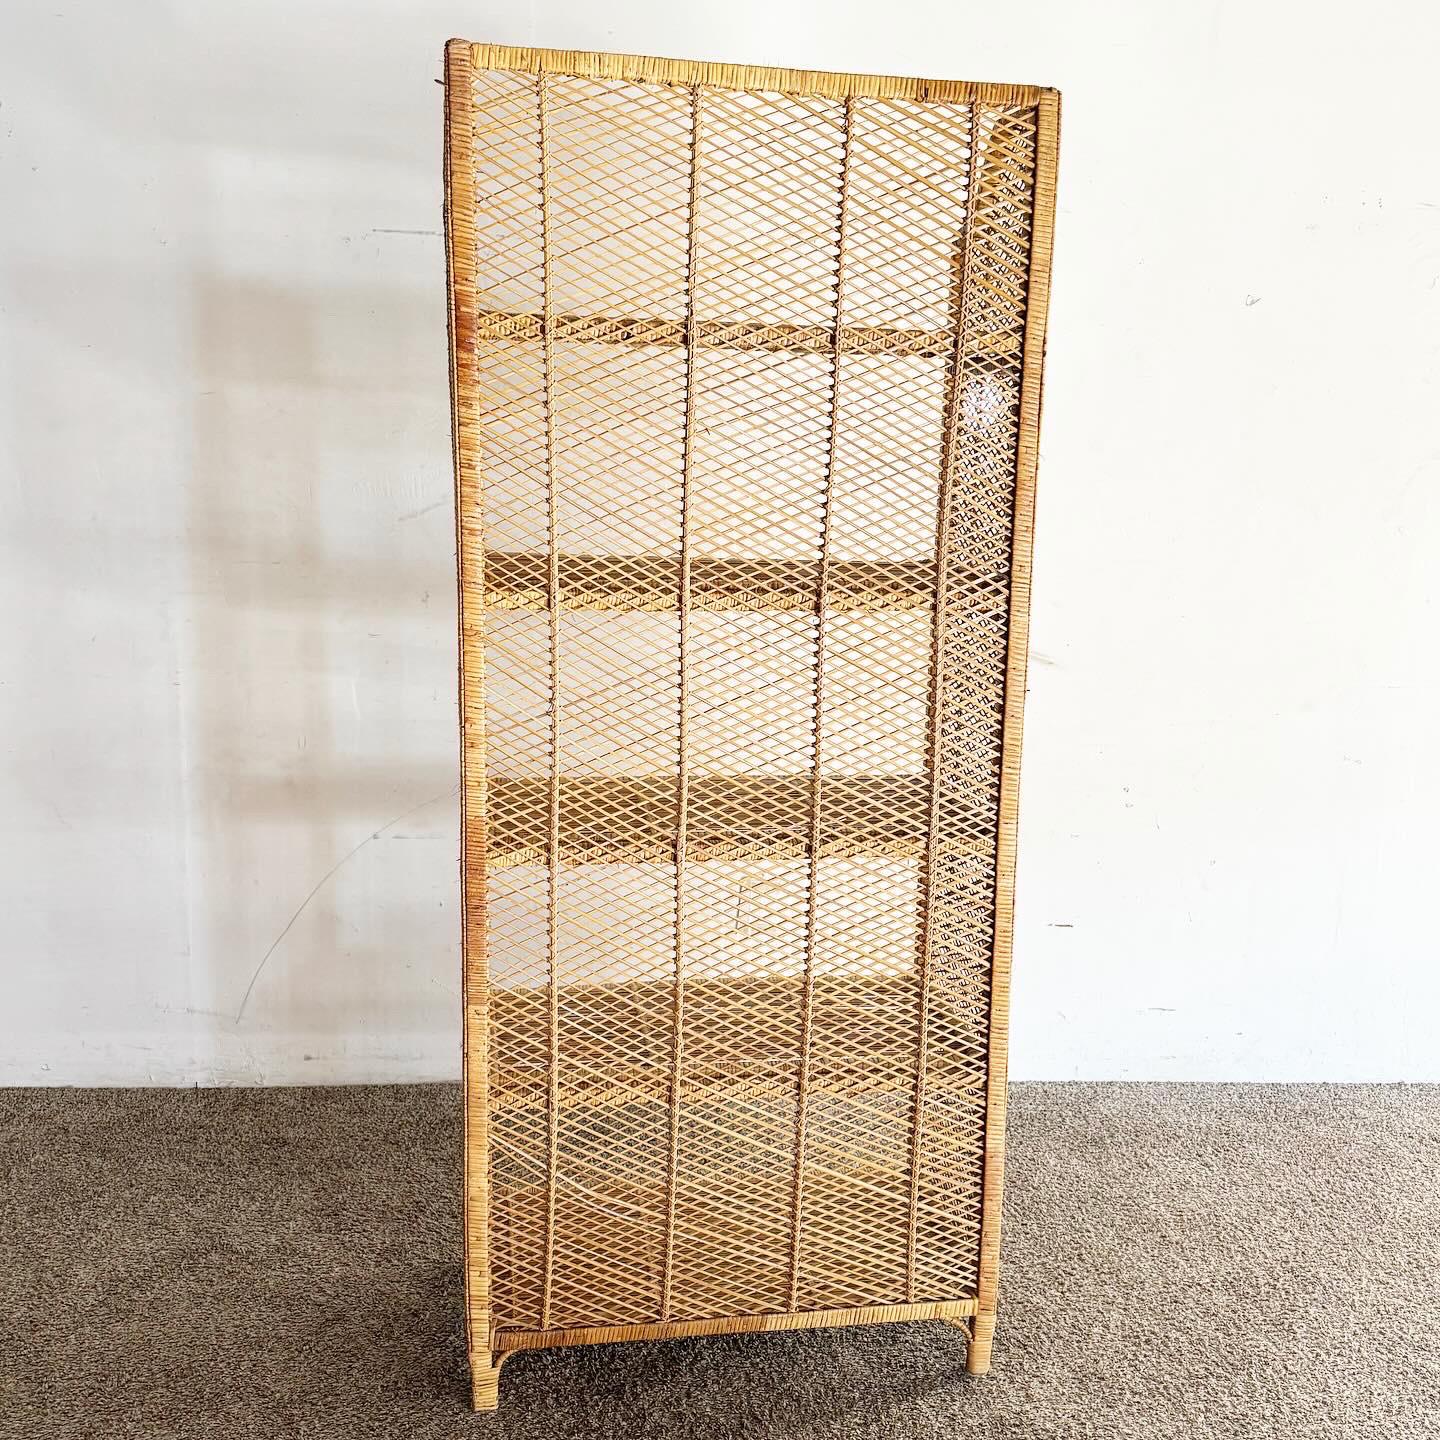 20th Century Boho Chic Wicker Rattan Etagere With 4 Removable Shelves For Sale